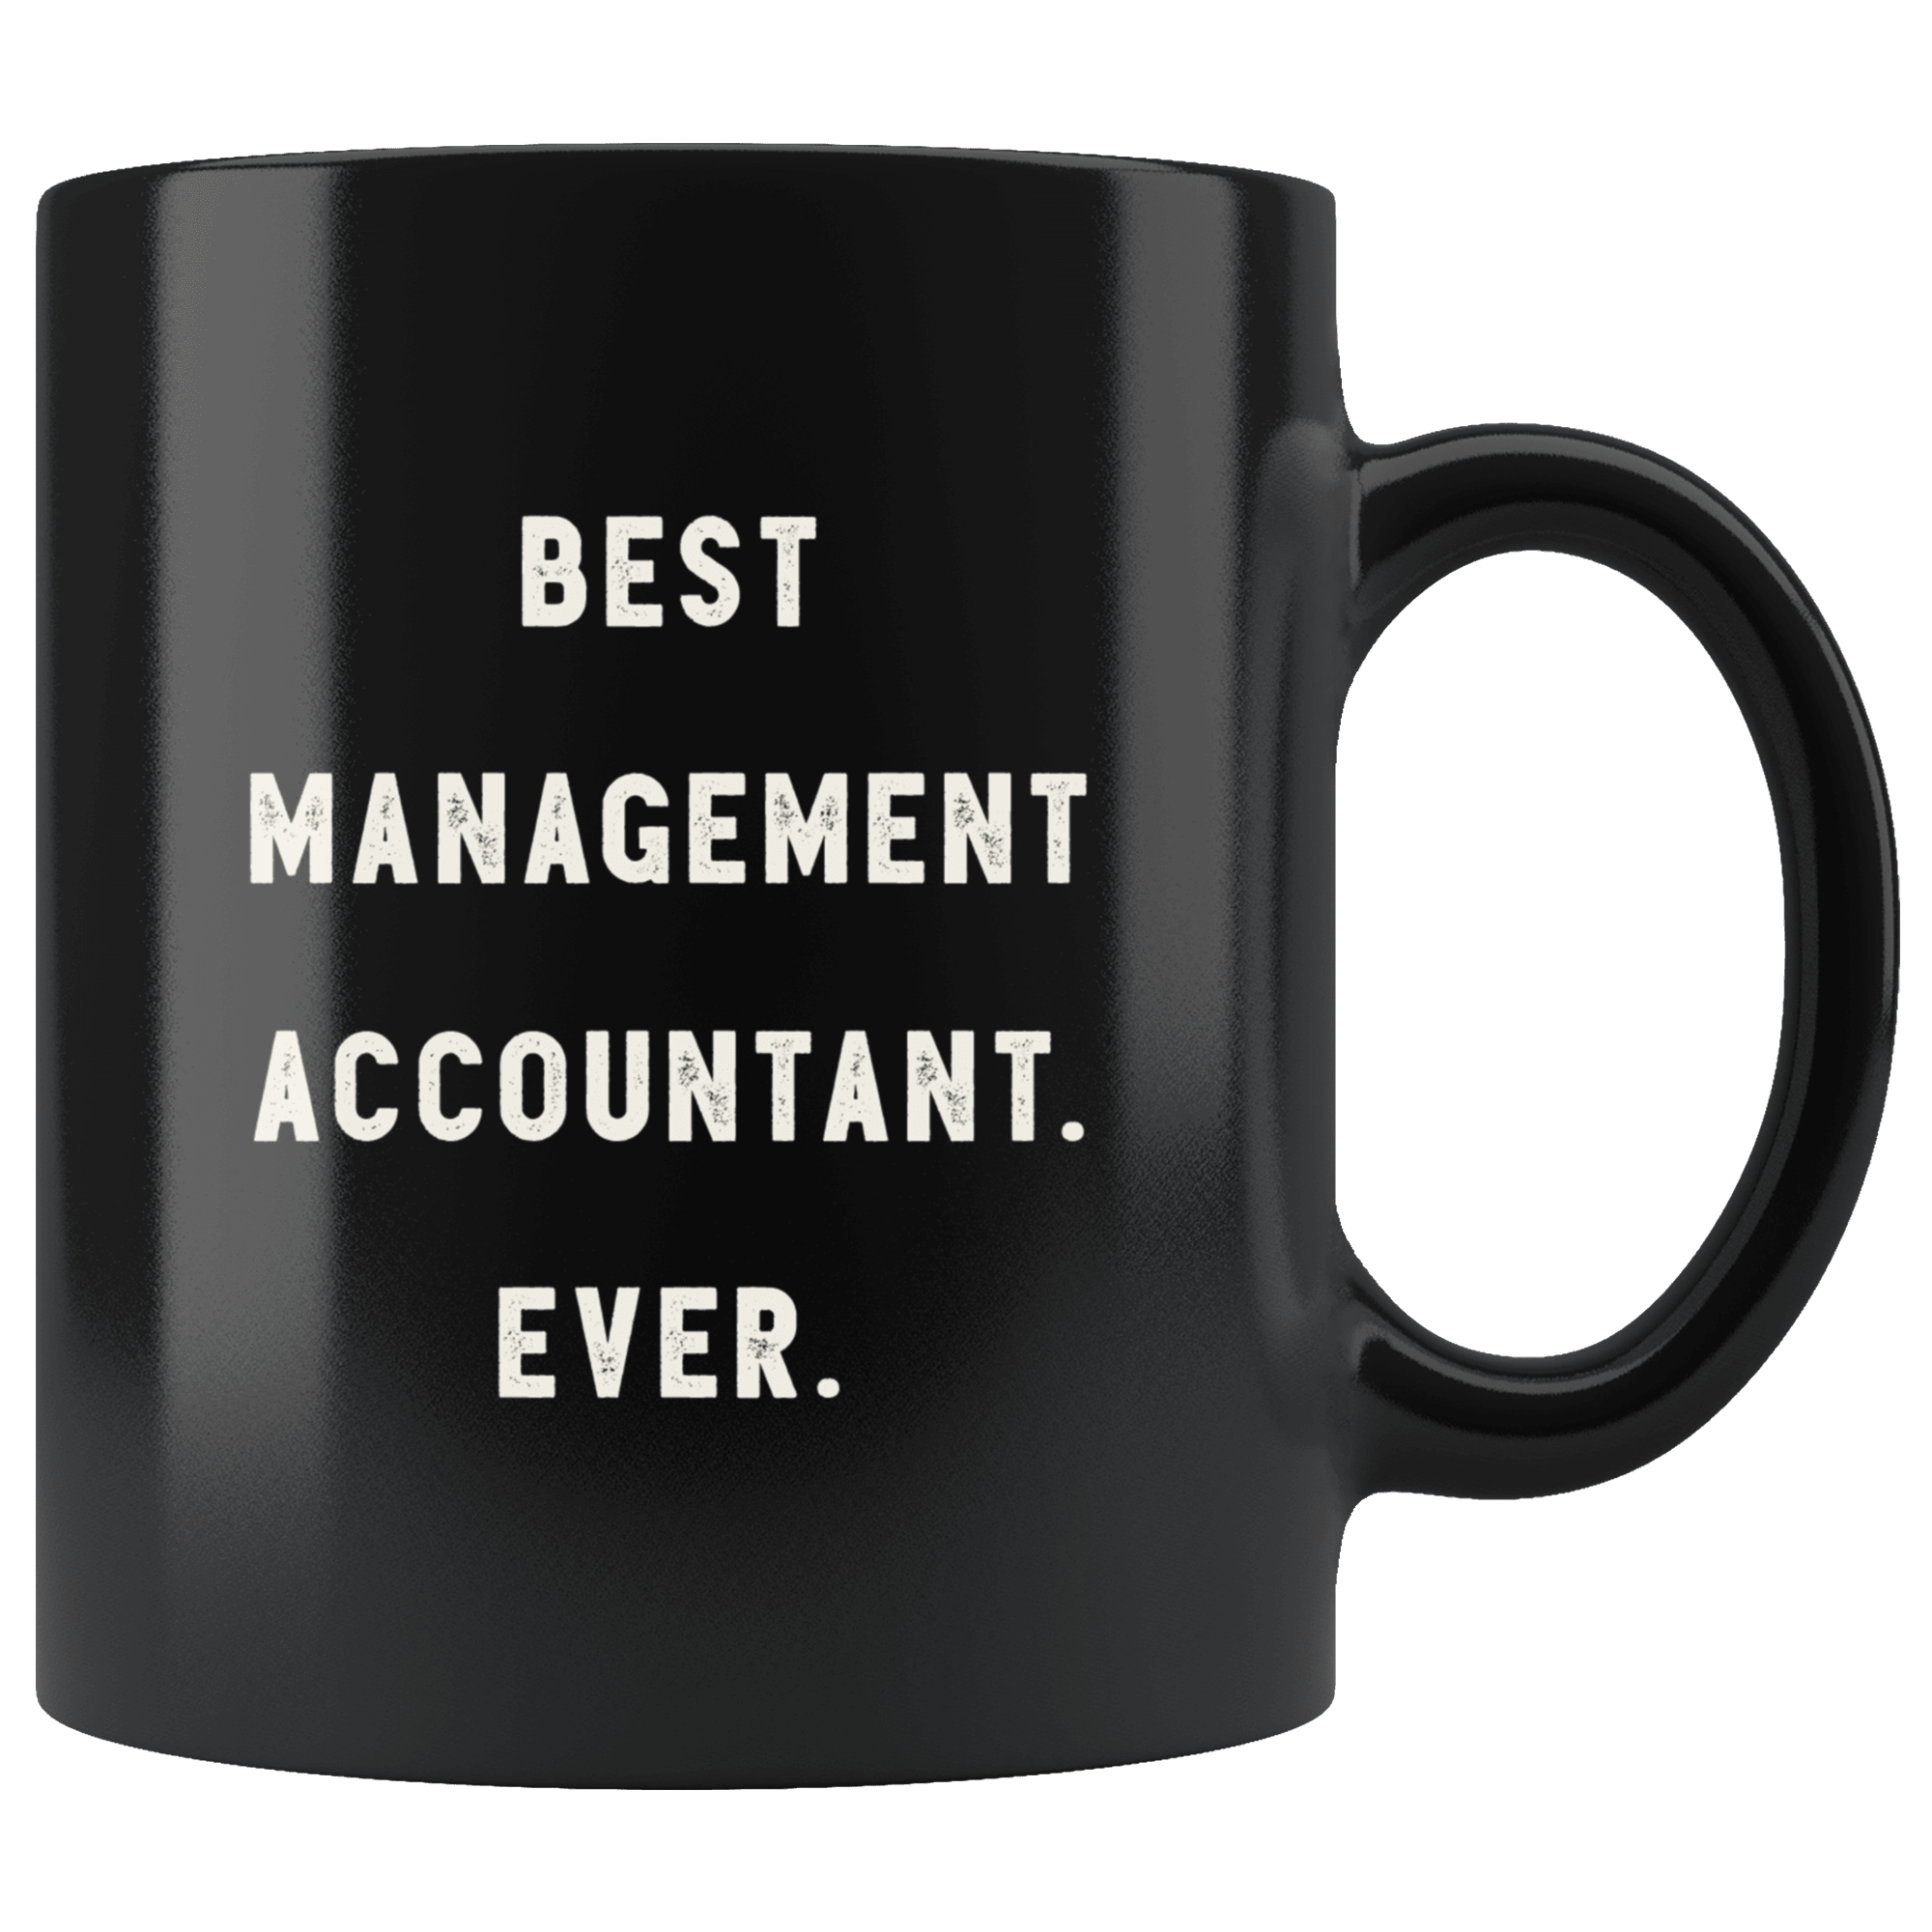 Compare prices for Funny Accountant Gifts across all European Amazon stores